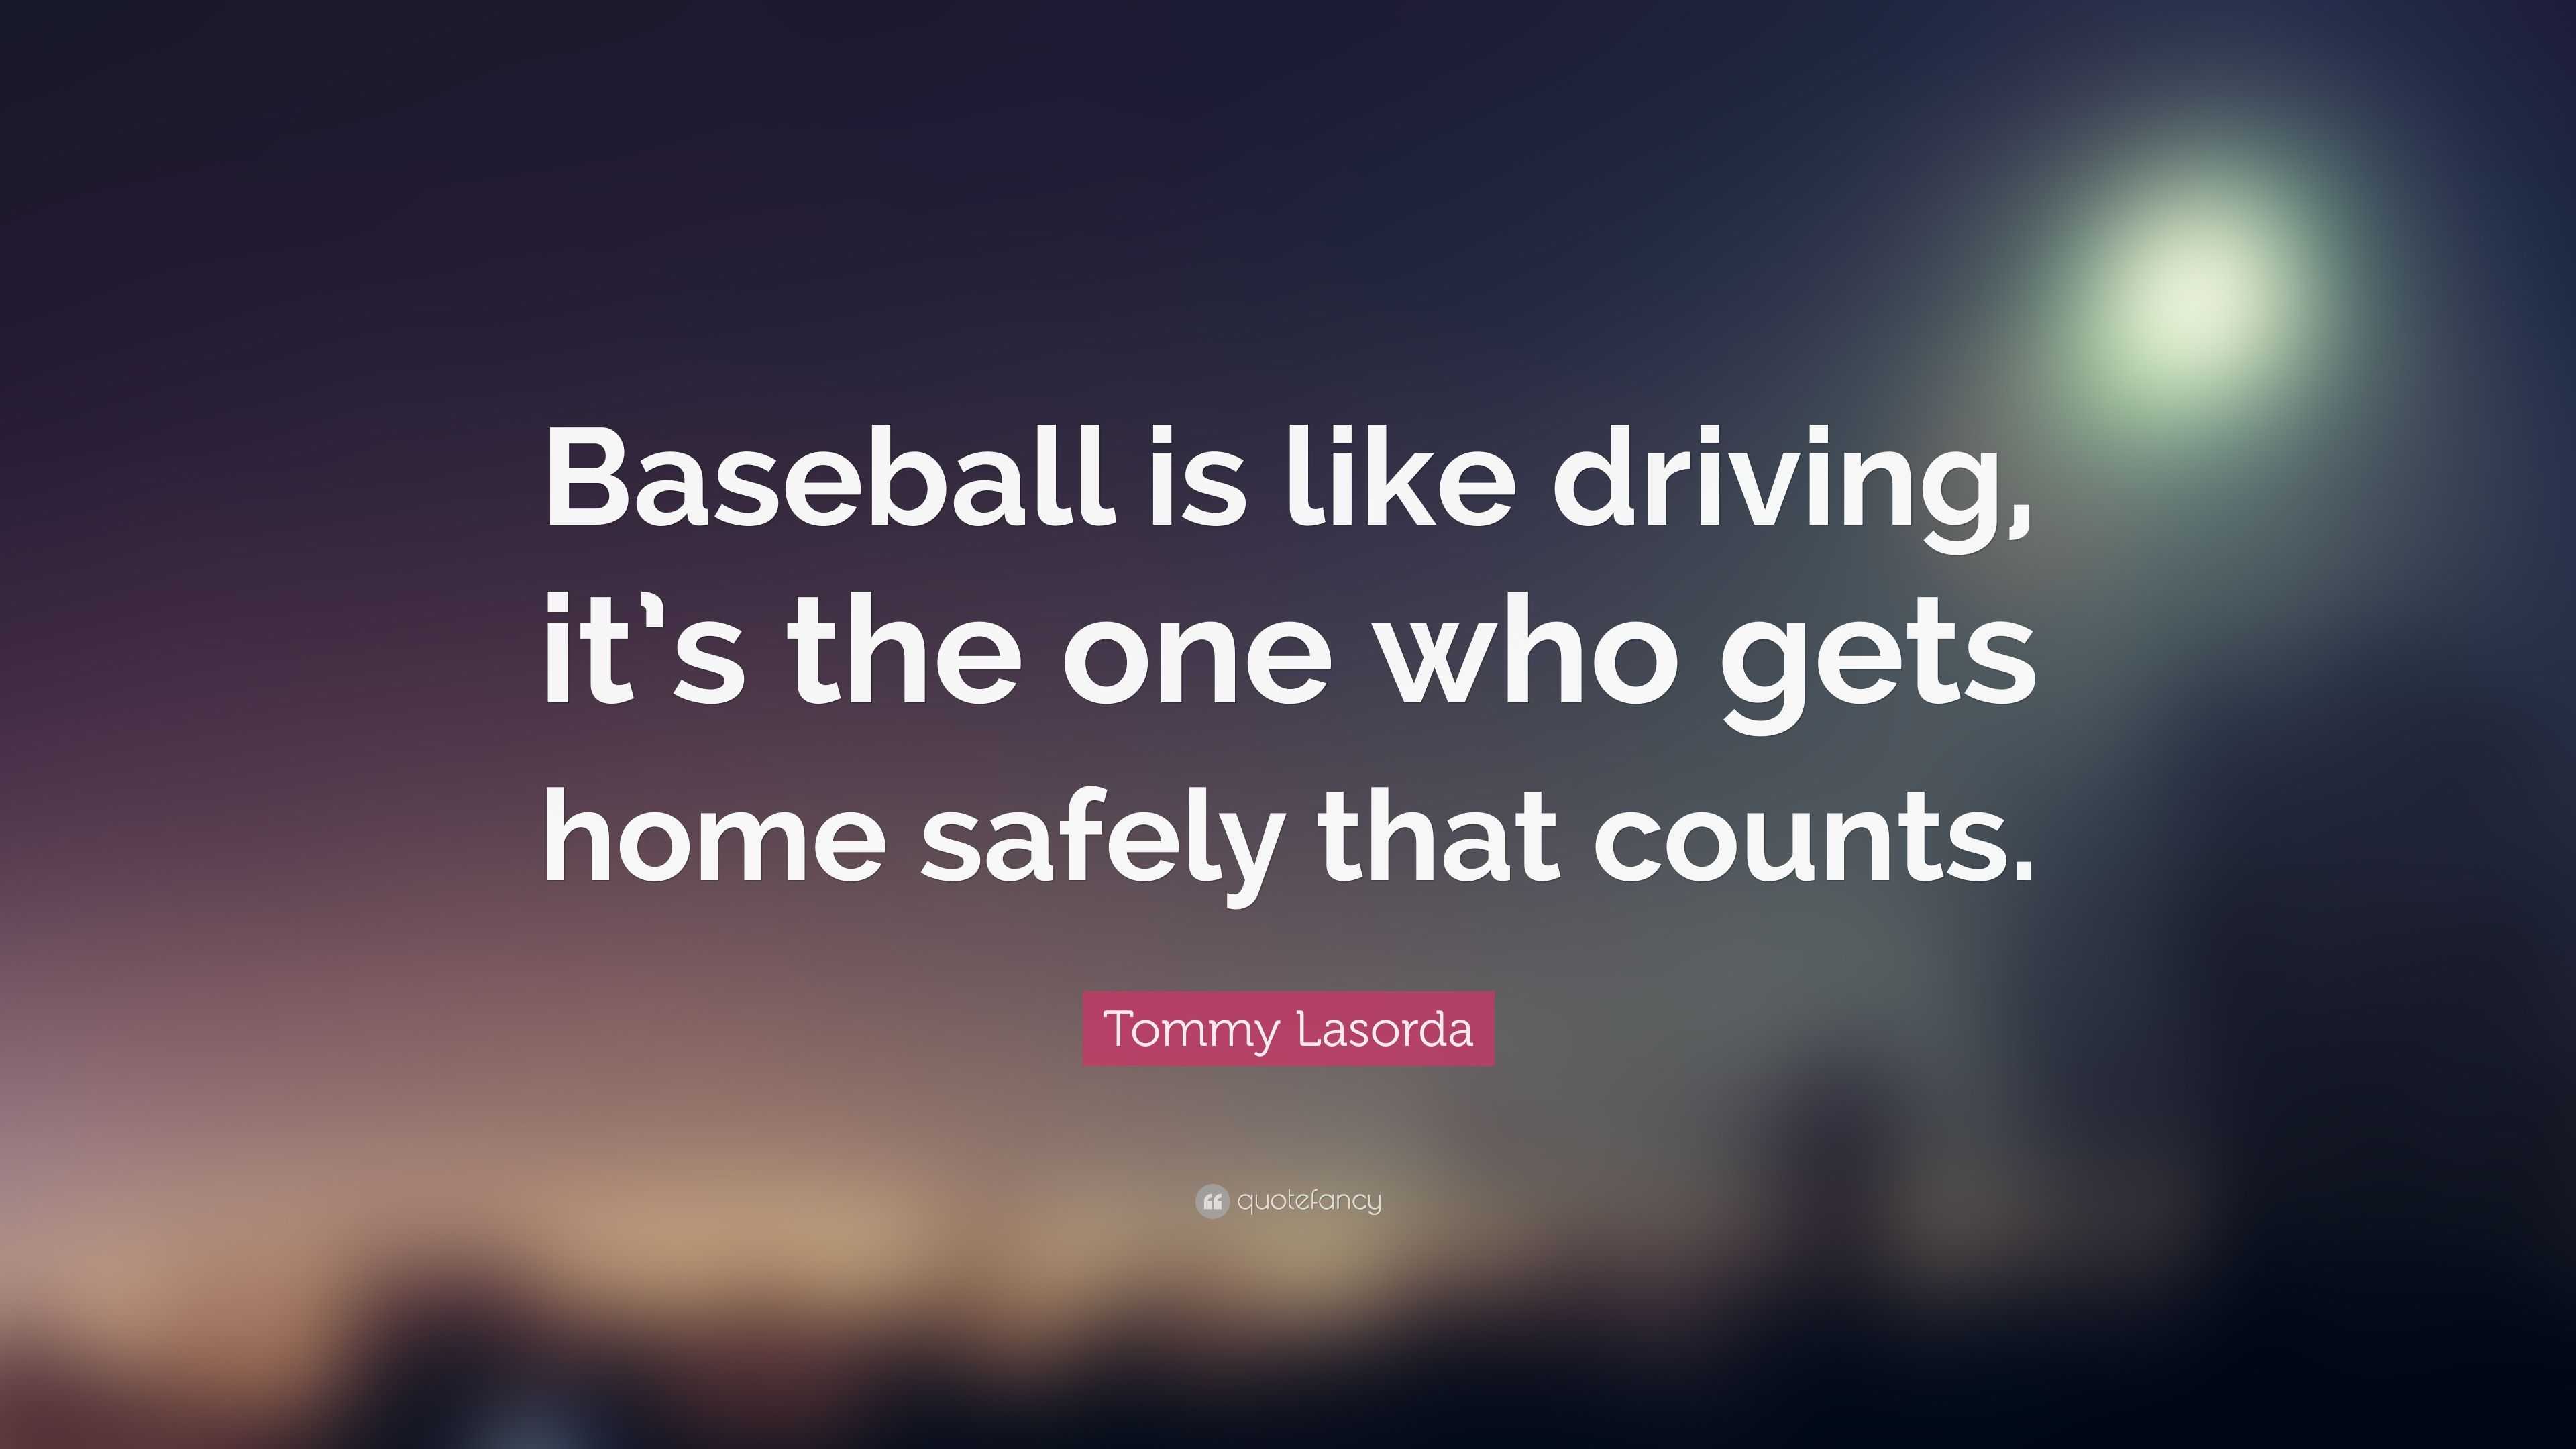 Tommy Lasorda Quote: “Baseball is like driving, it’s the one who gets ...